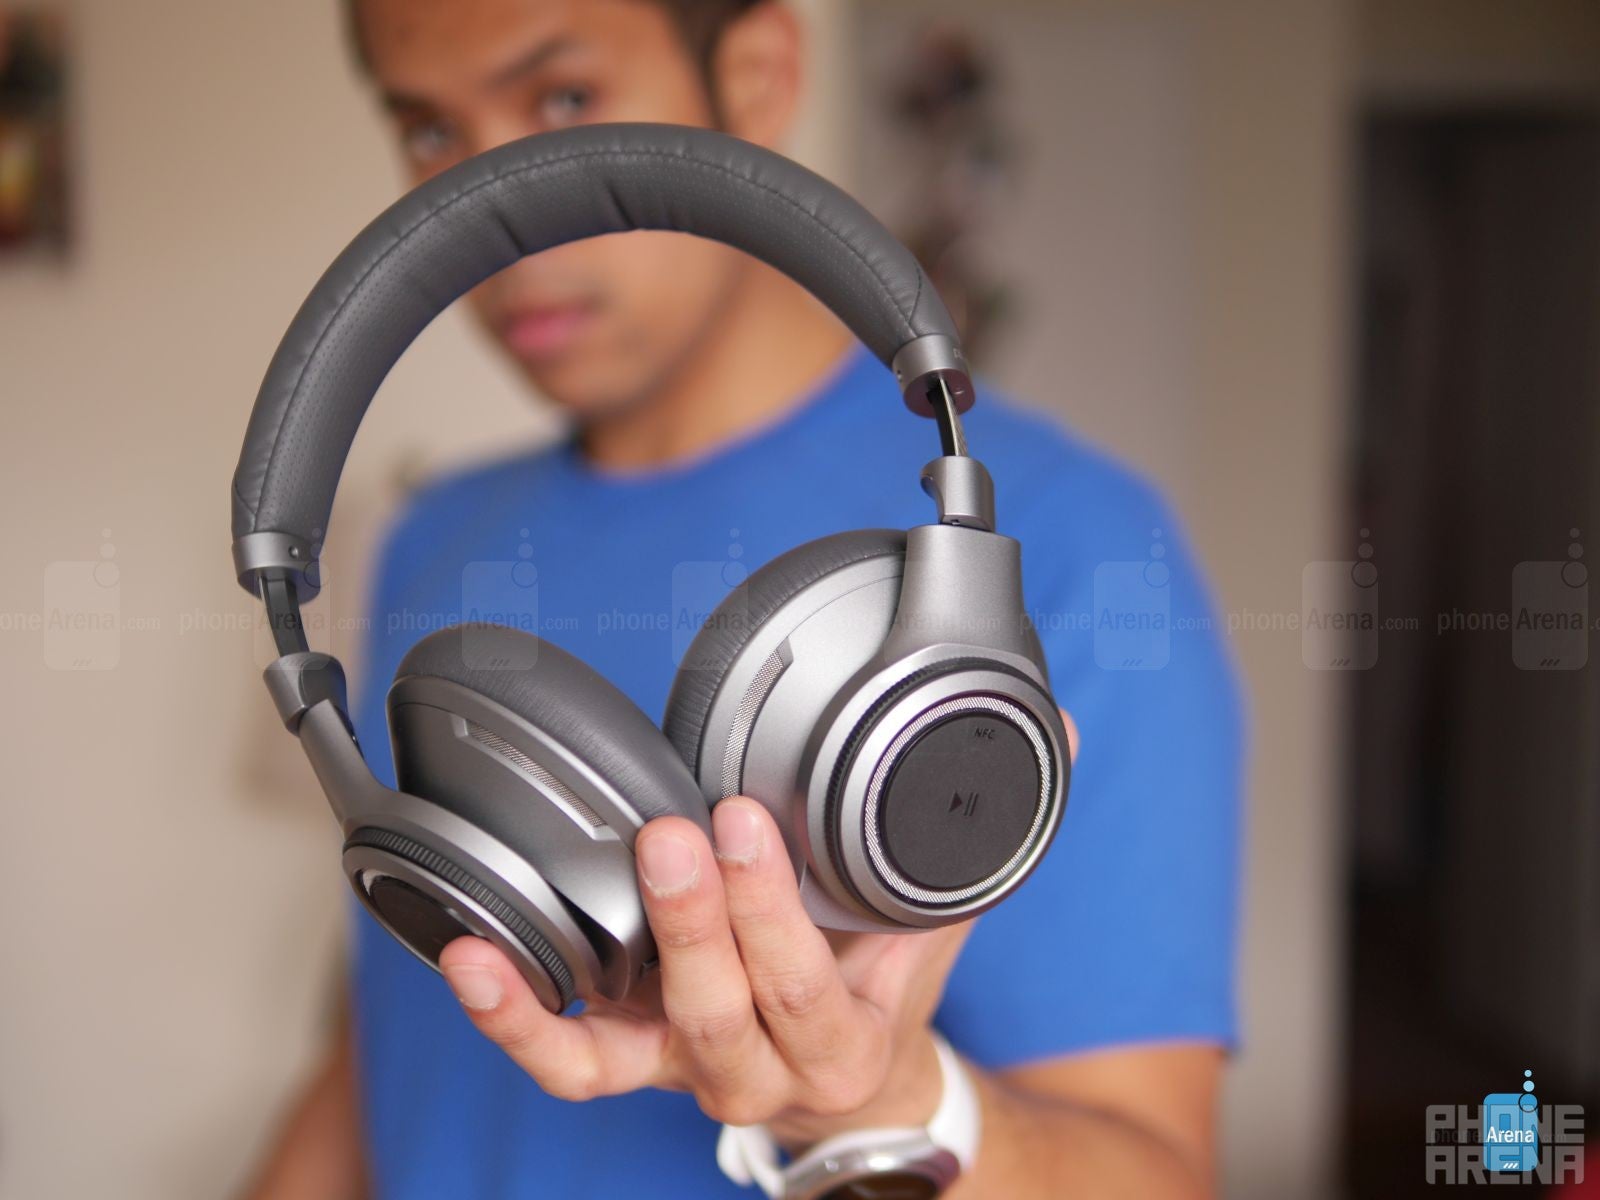 The same 40mm drivers help produce the potent mixture we’ve been exposed to before - Plantronics BackBeat Pro+ Review